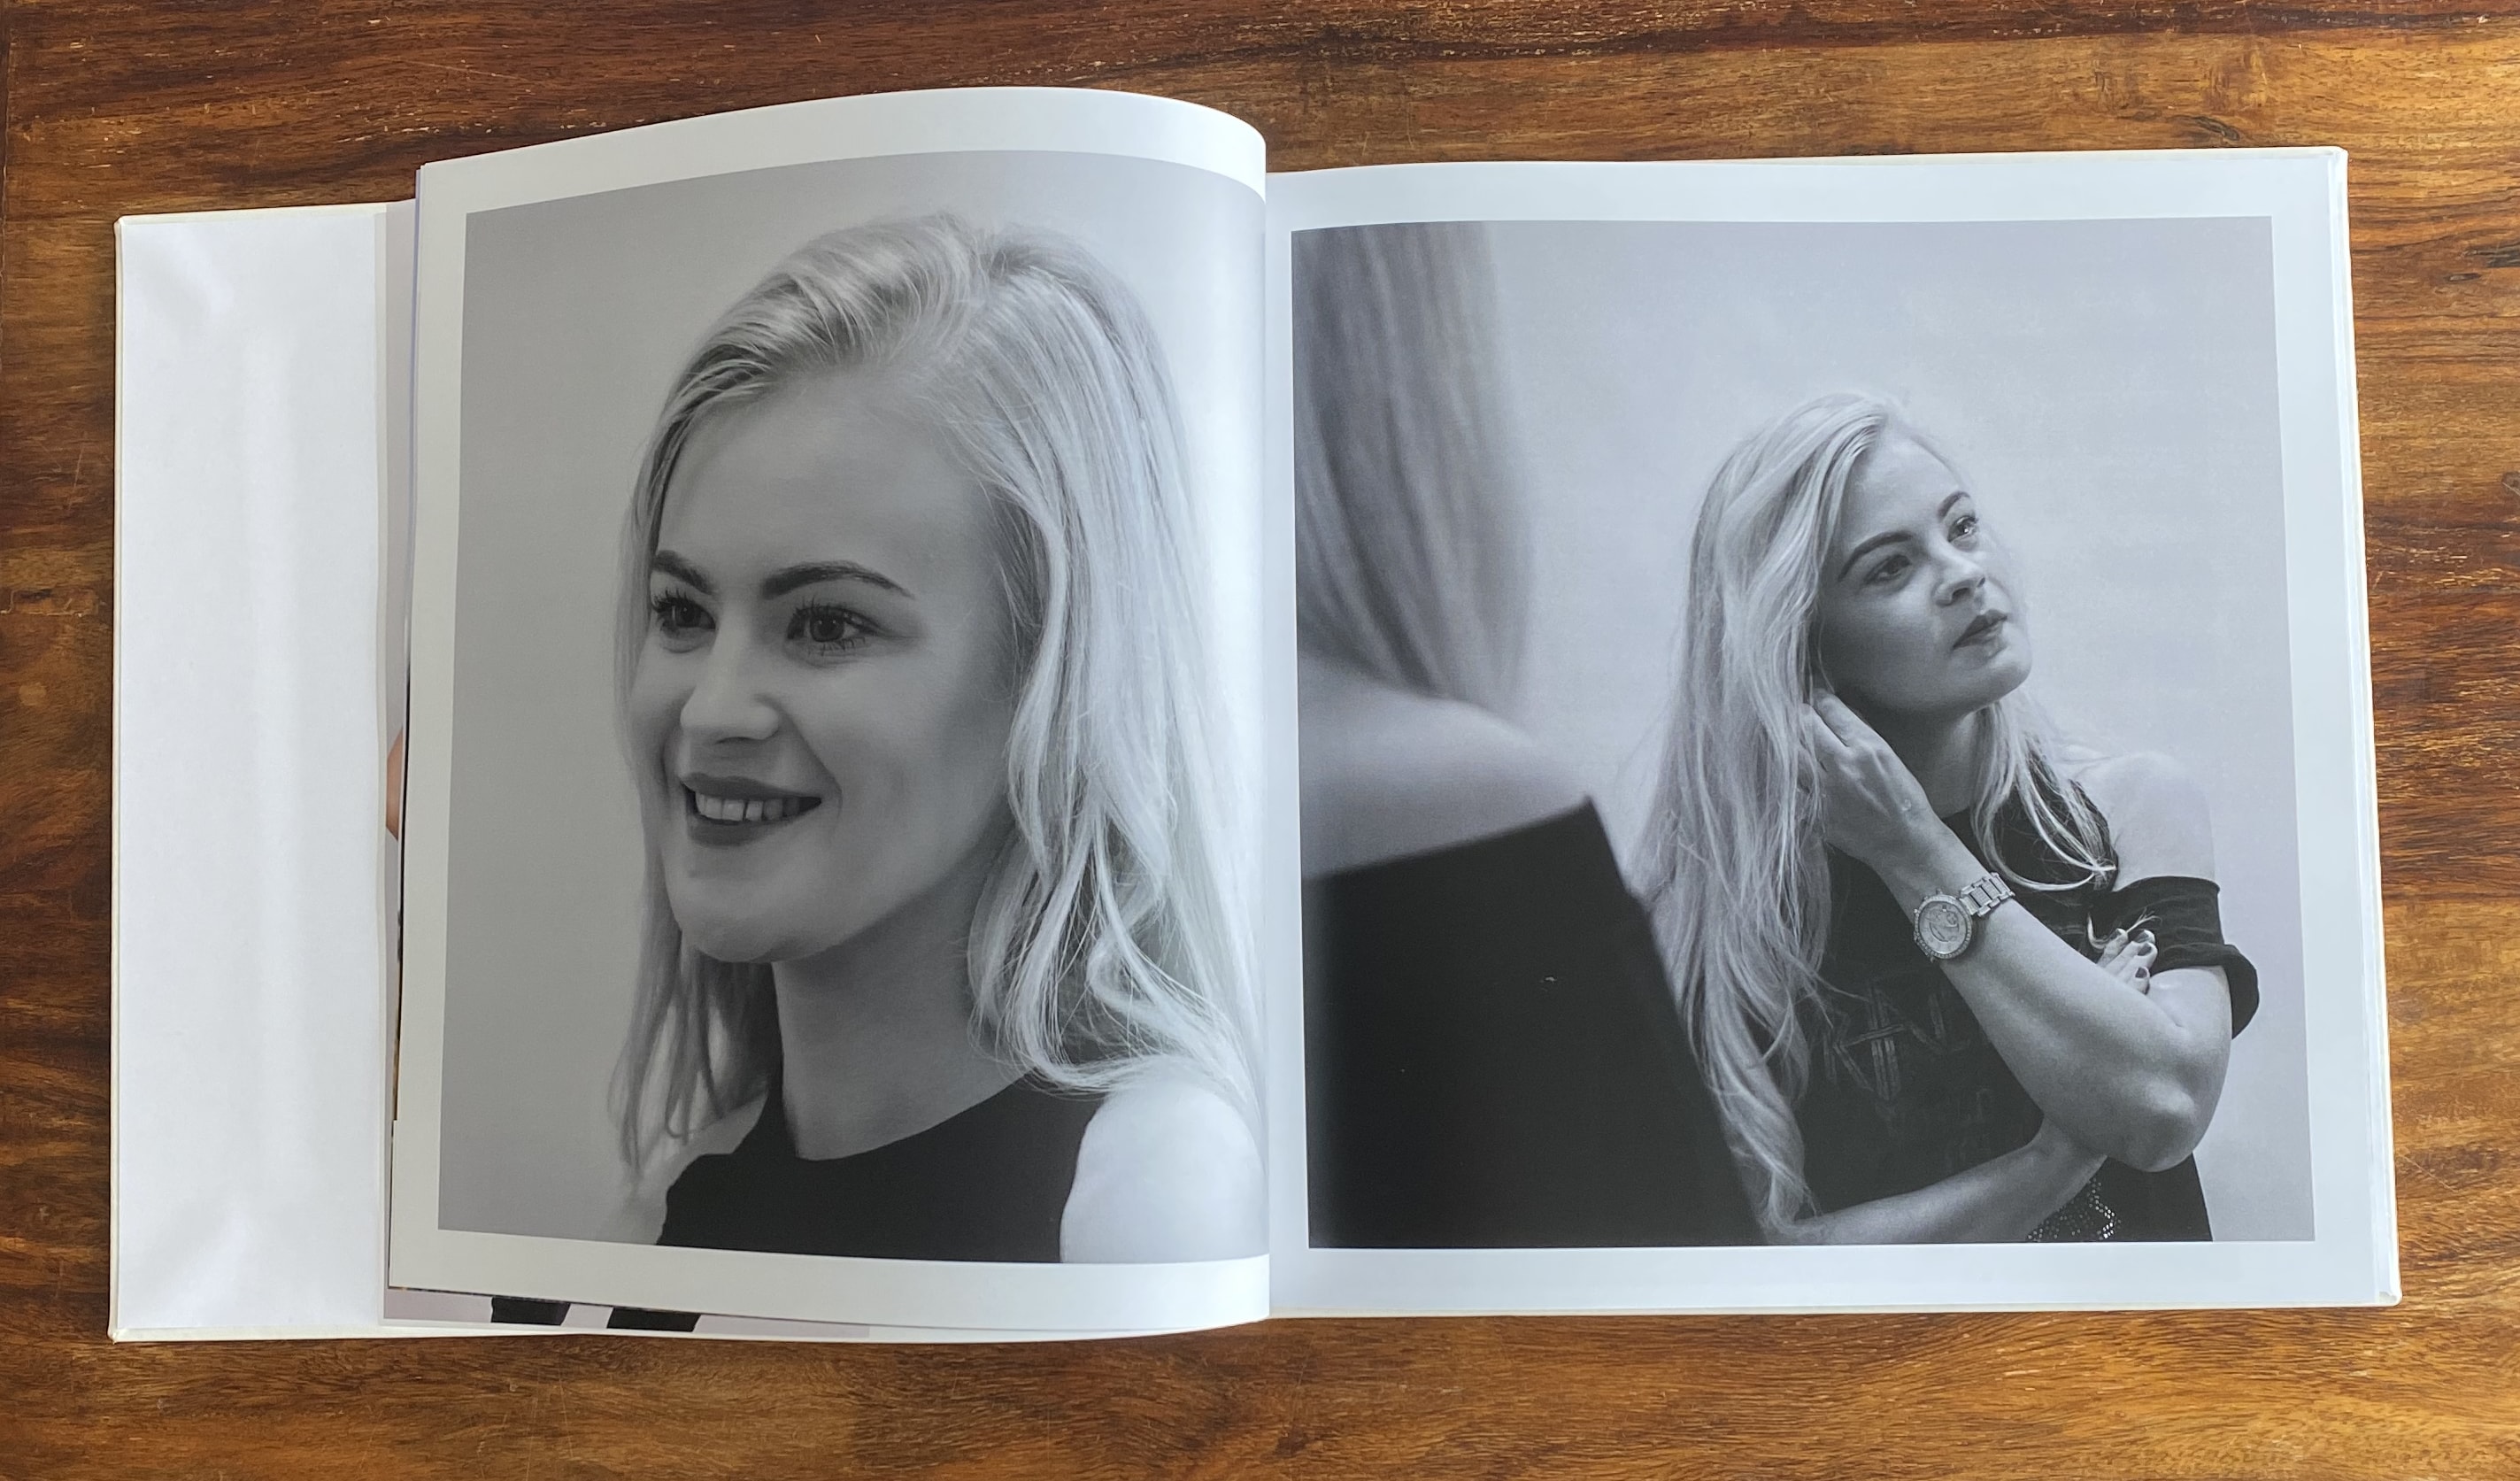 A photo book opened to a centre page, with a photo of a young woman smiling on one page and putting earrings in on the other.